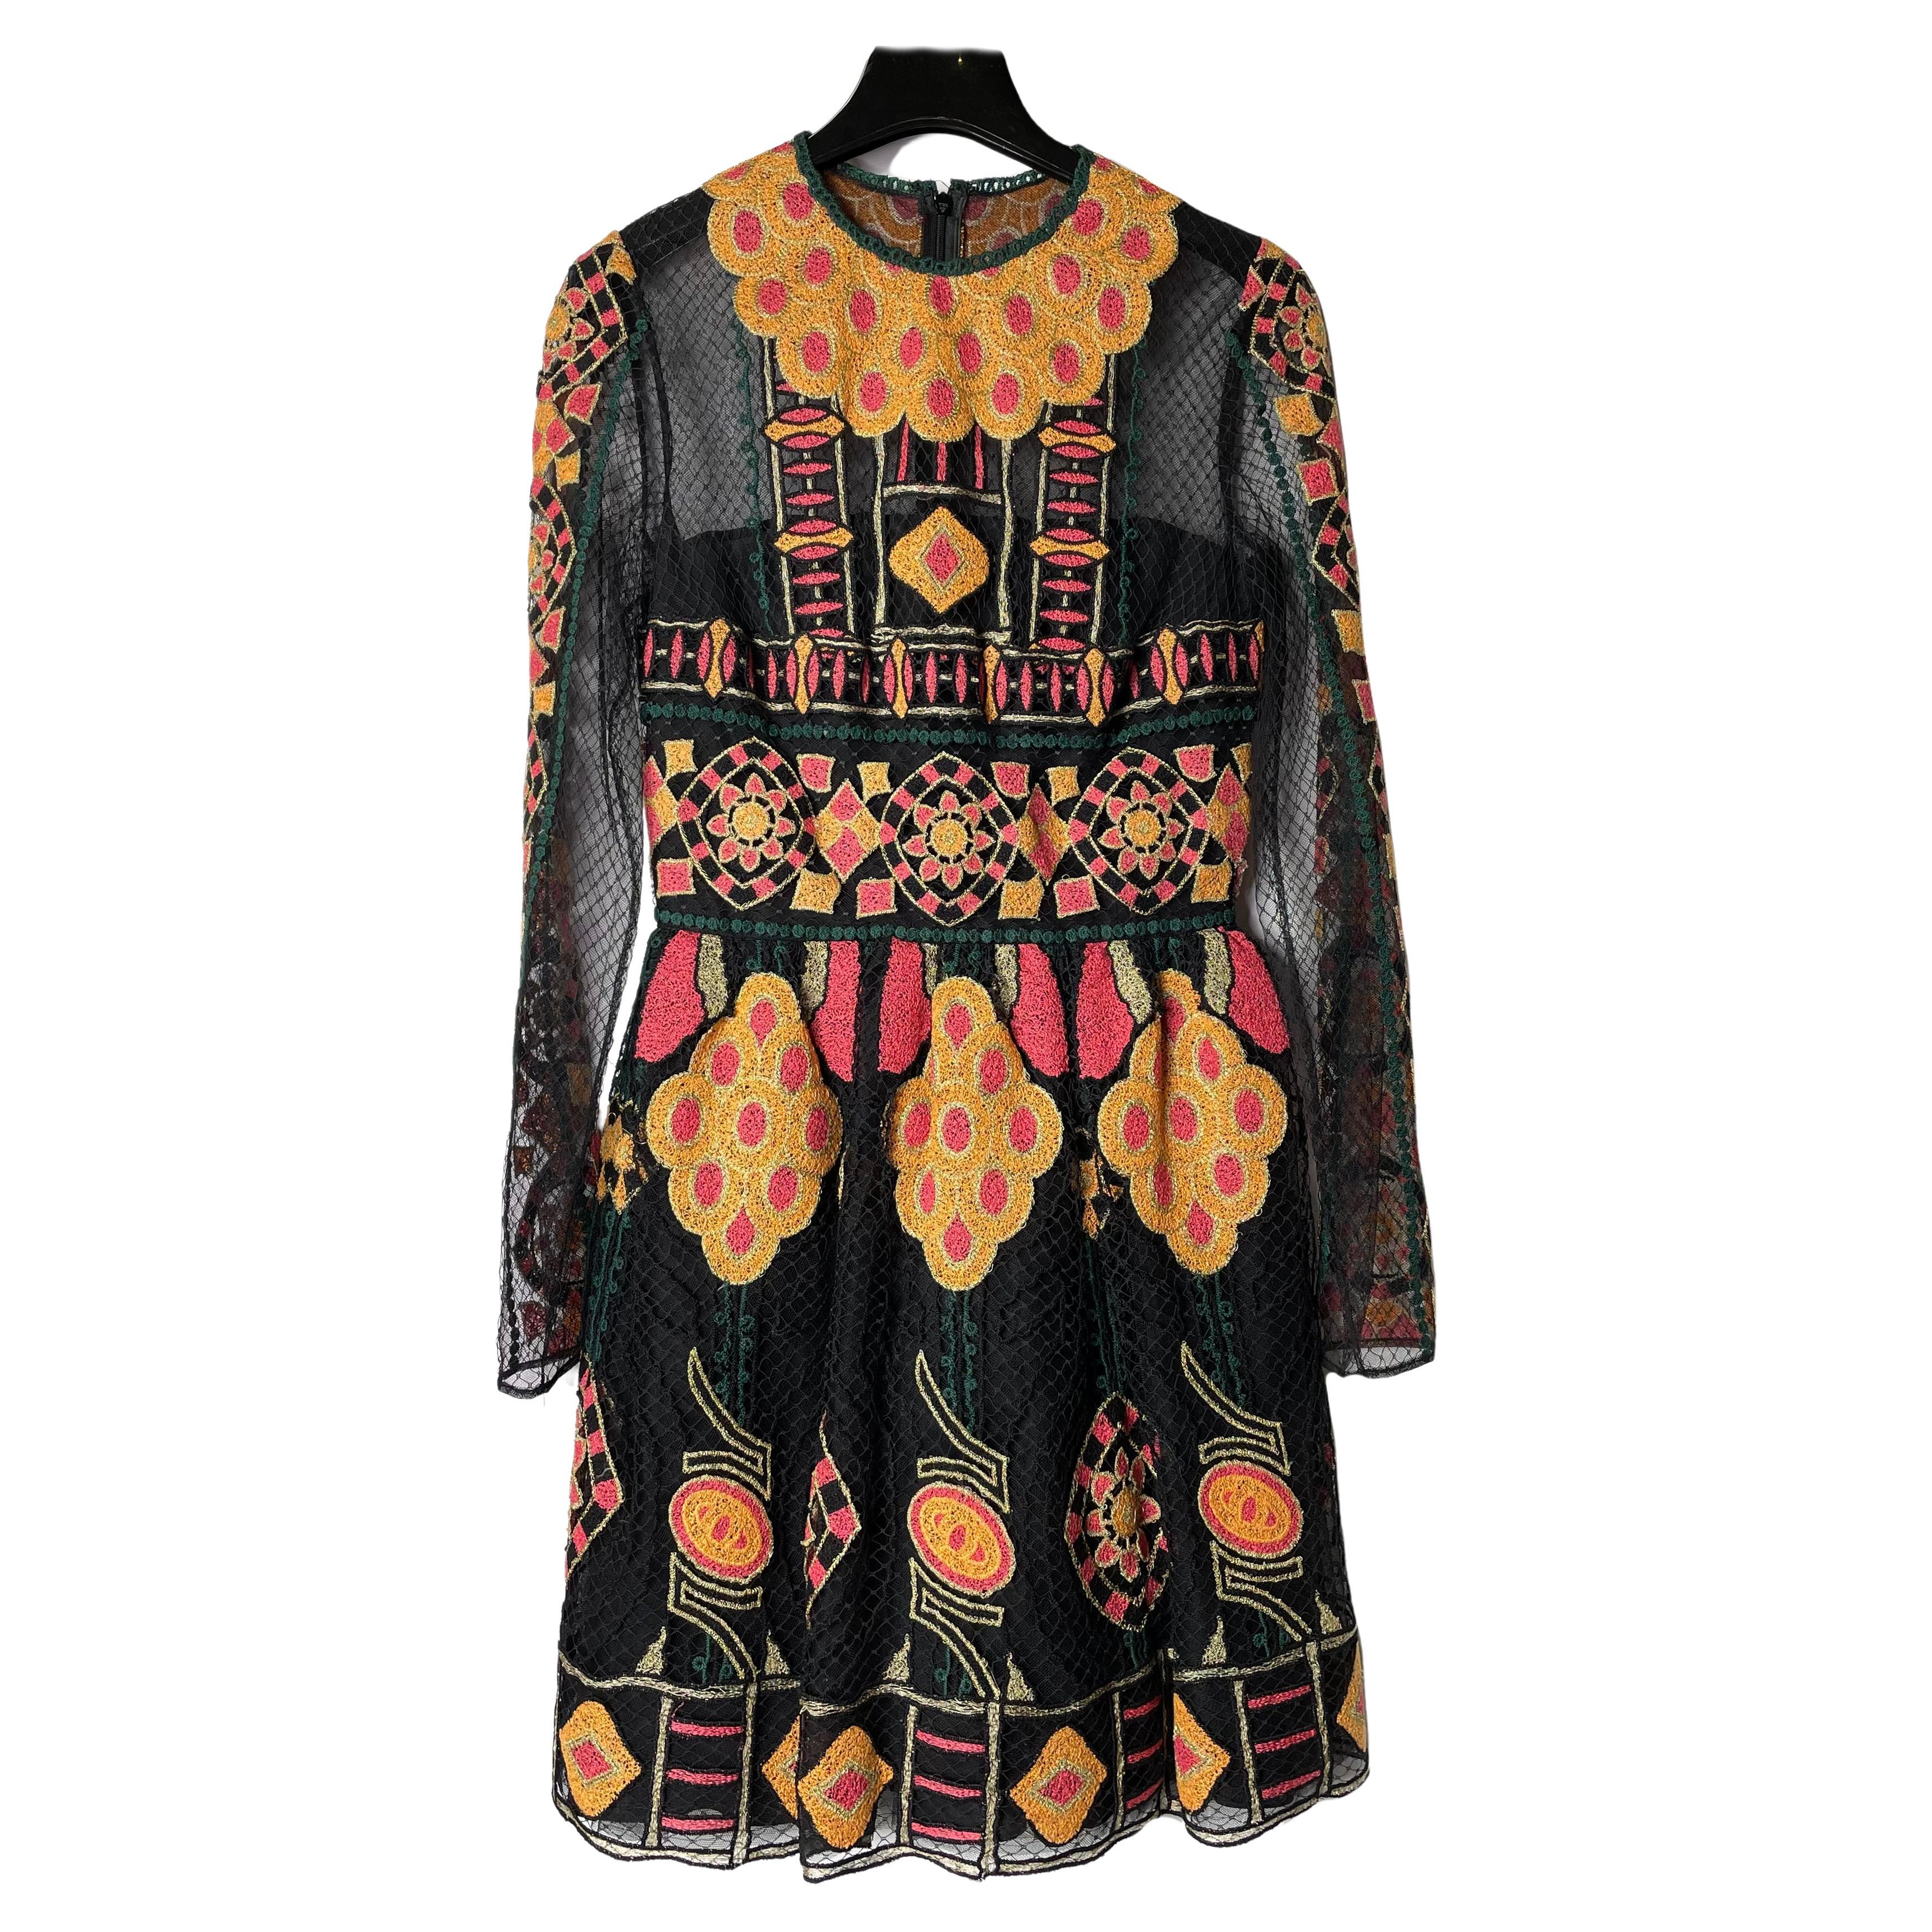 Stunning Valentino couture dress.
Collection Spring 2014

Black mesh dress embroidered with multi-colored ornament. 

Fastens with a zipper on the back. 

Size – IT38 / XS-S

Length – 81 cm

Waist – 64 cm

Sleeve – 60 cm

Armpit to armpit – 39